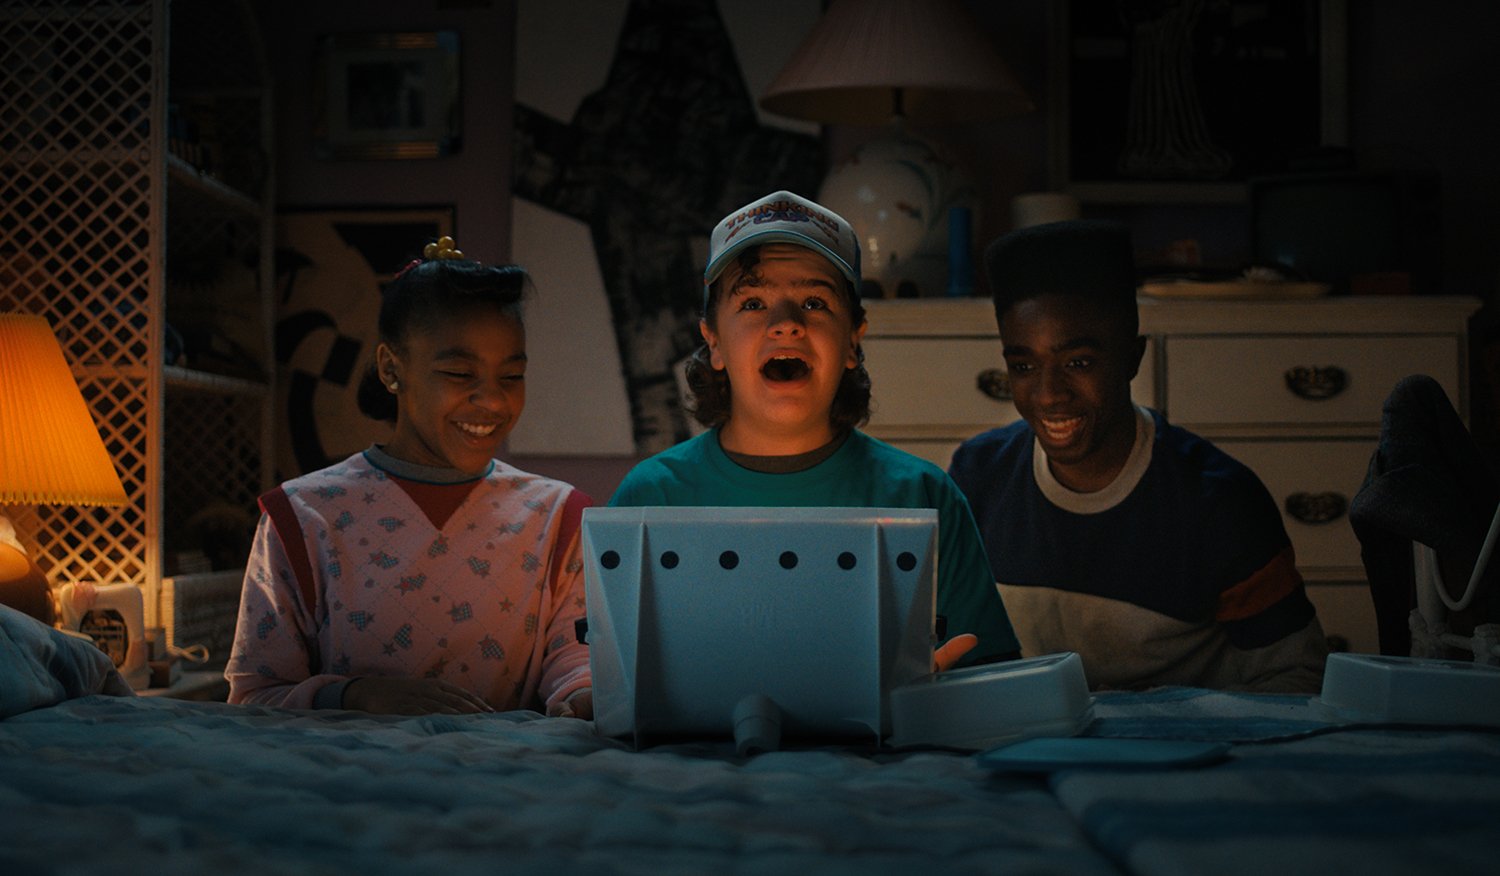 Priah Ferguson as Erica Sinclair, Gaten Matarazzo as Dustin Henderson and Caleb McLaughlin as Lucas Sinclair in Stranger Things 4, which may be too scary for kids.